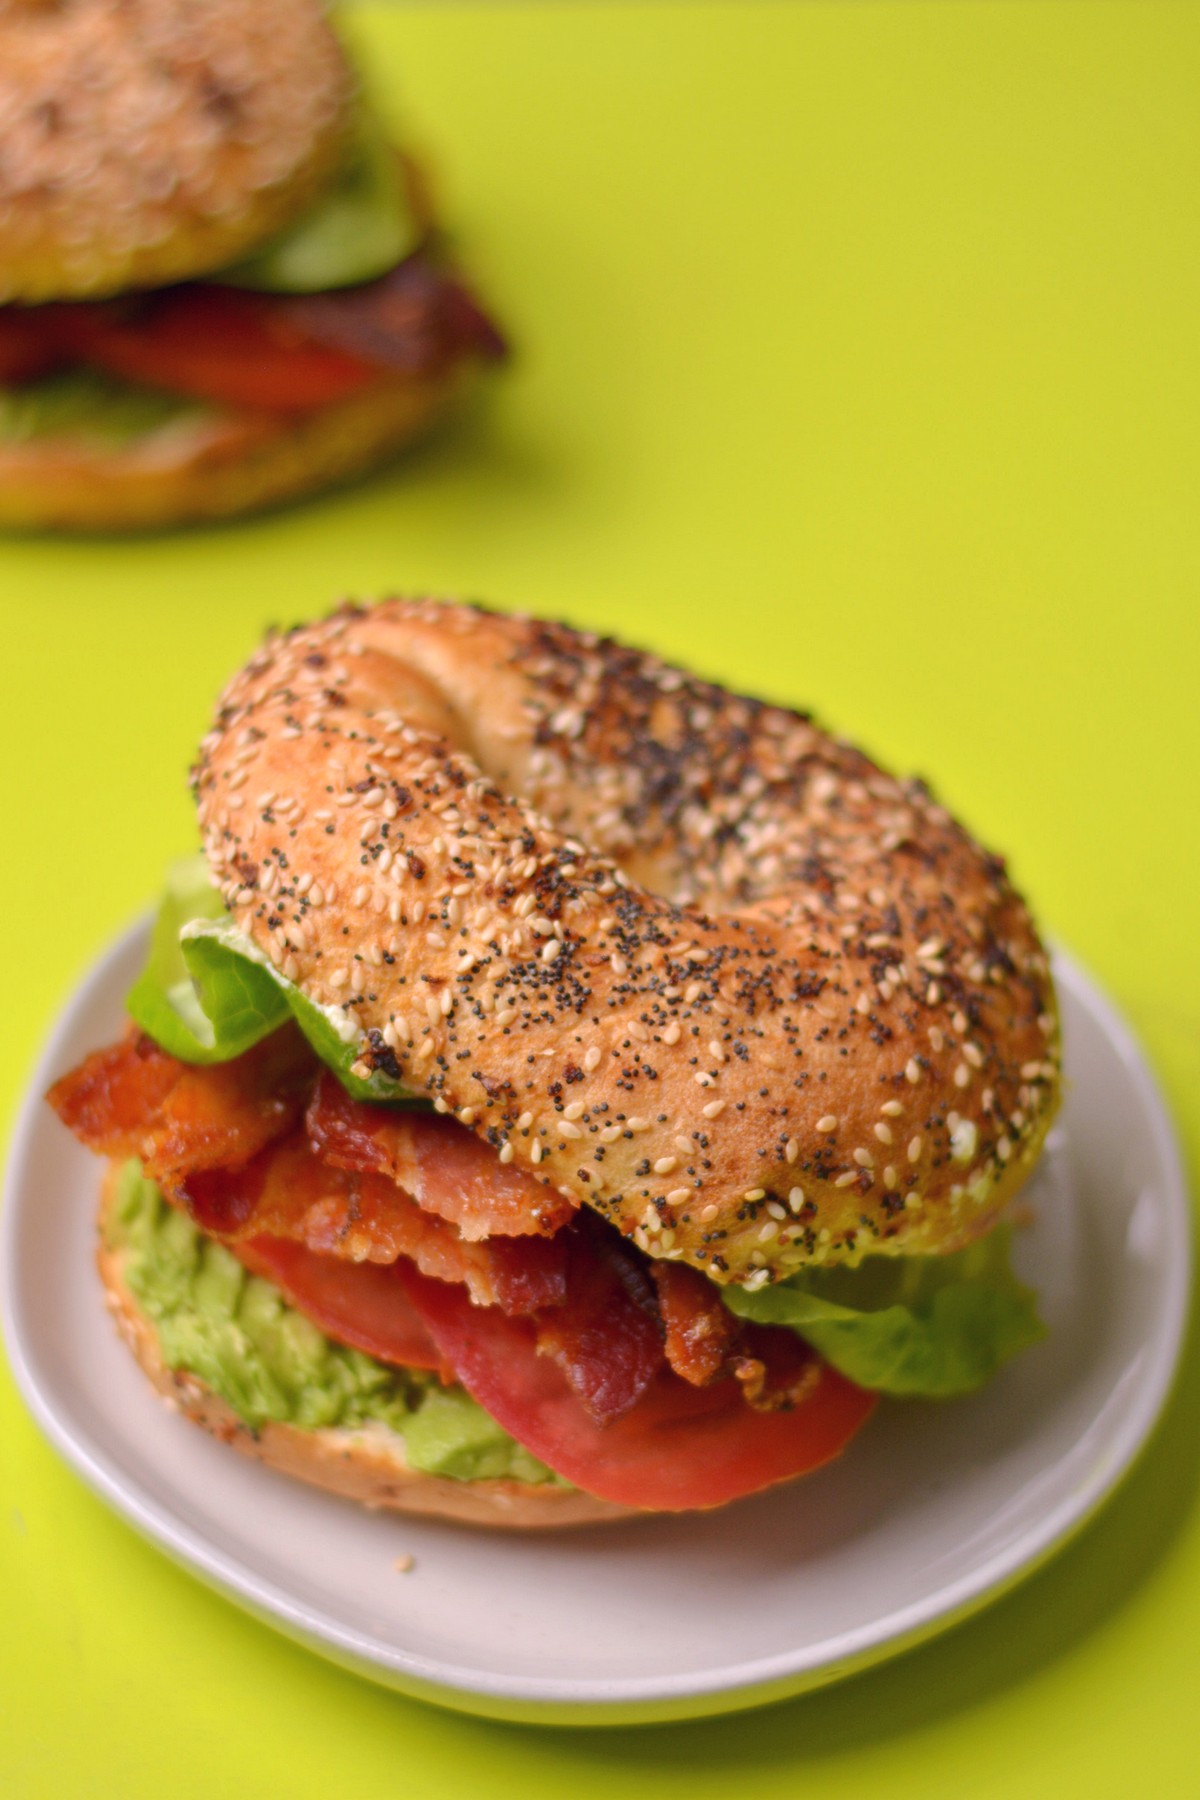 A bagel blt on a plate.